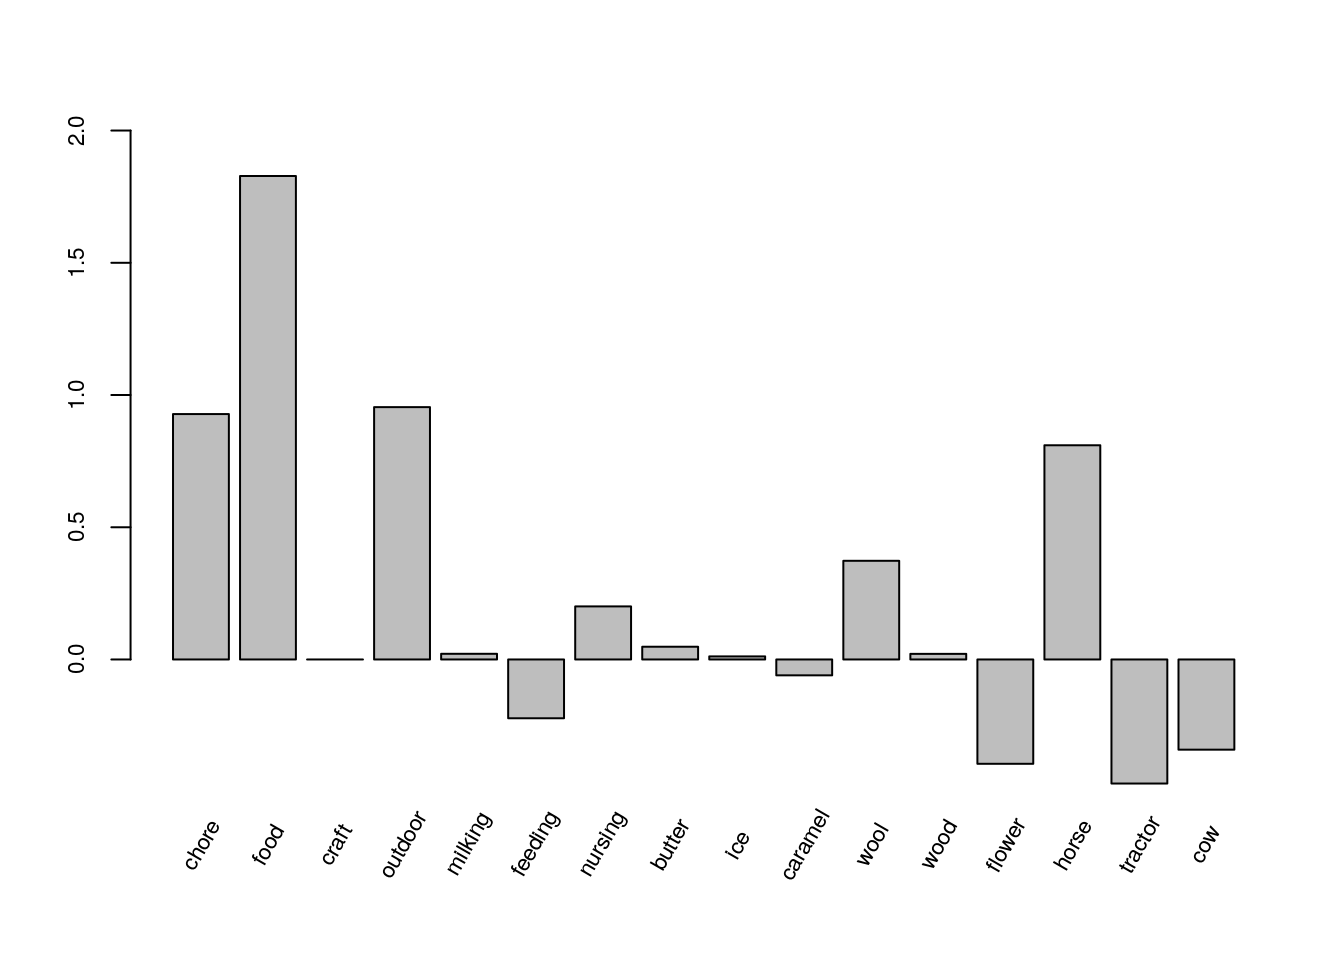 Bar plot of the estimated coefficients of the attribute and attribute-level variables for the marginal model.